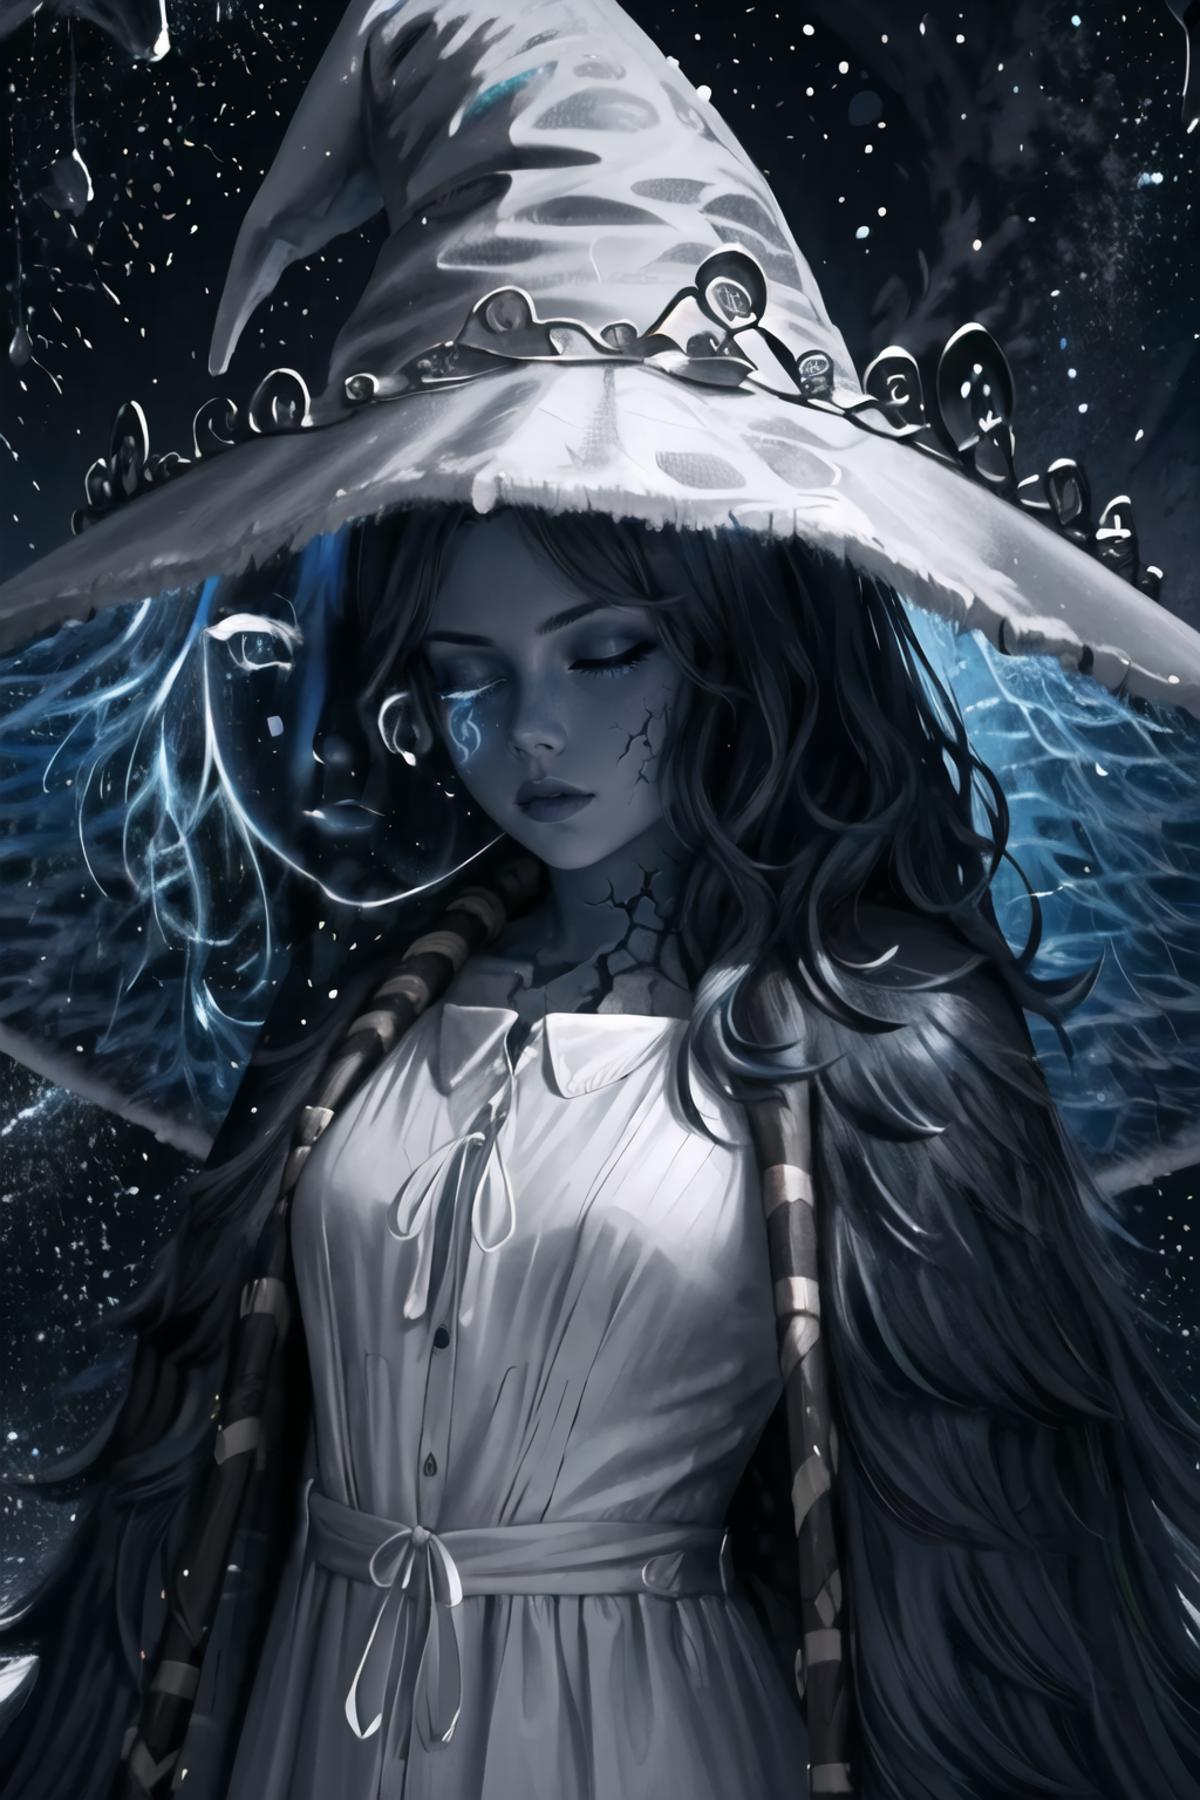 Artwork of a woman in a white dress and witch's hat.